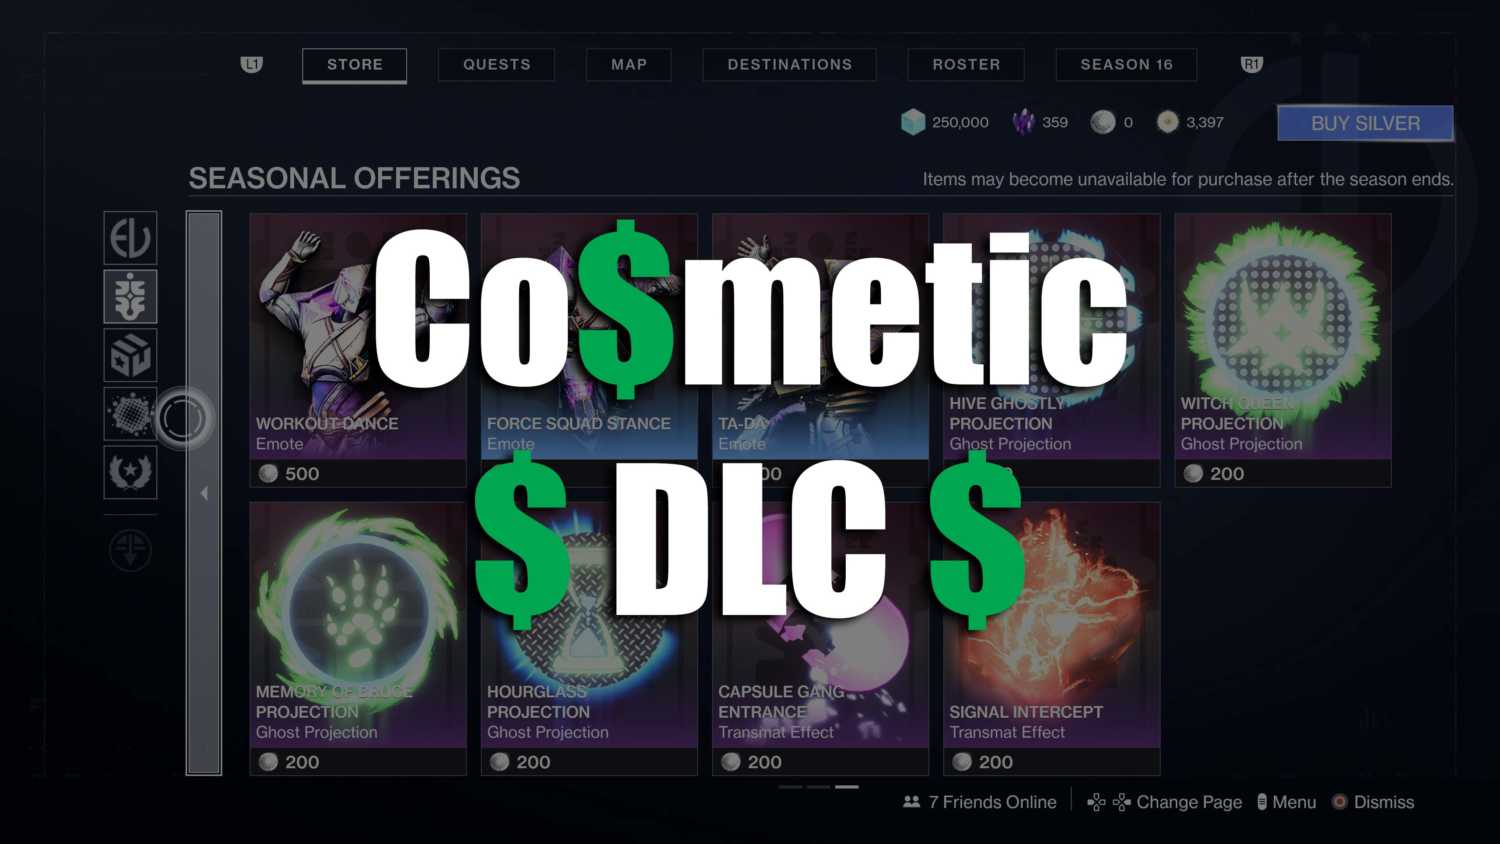 Gaming Cosmetic DLC is Hideously Overpriced Image